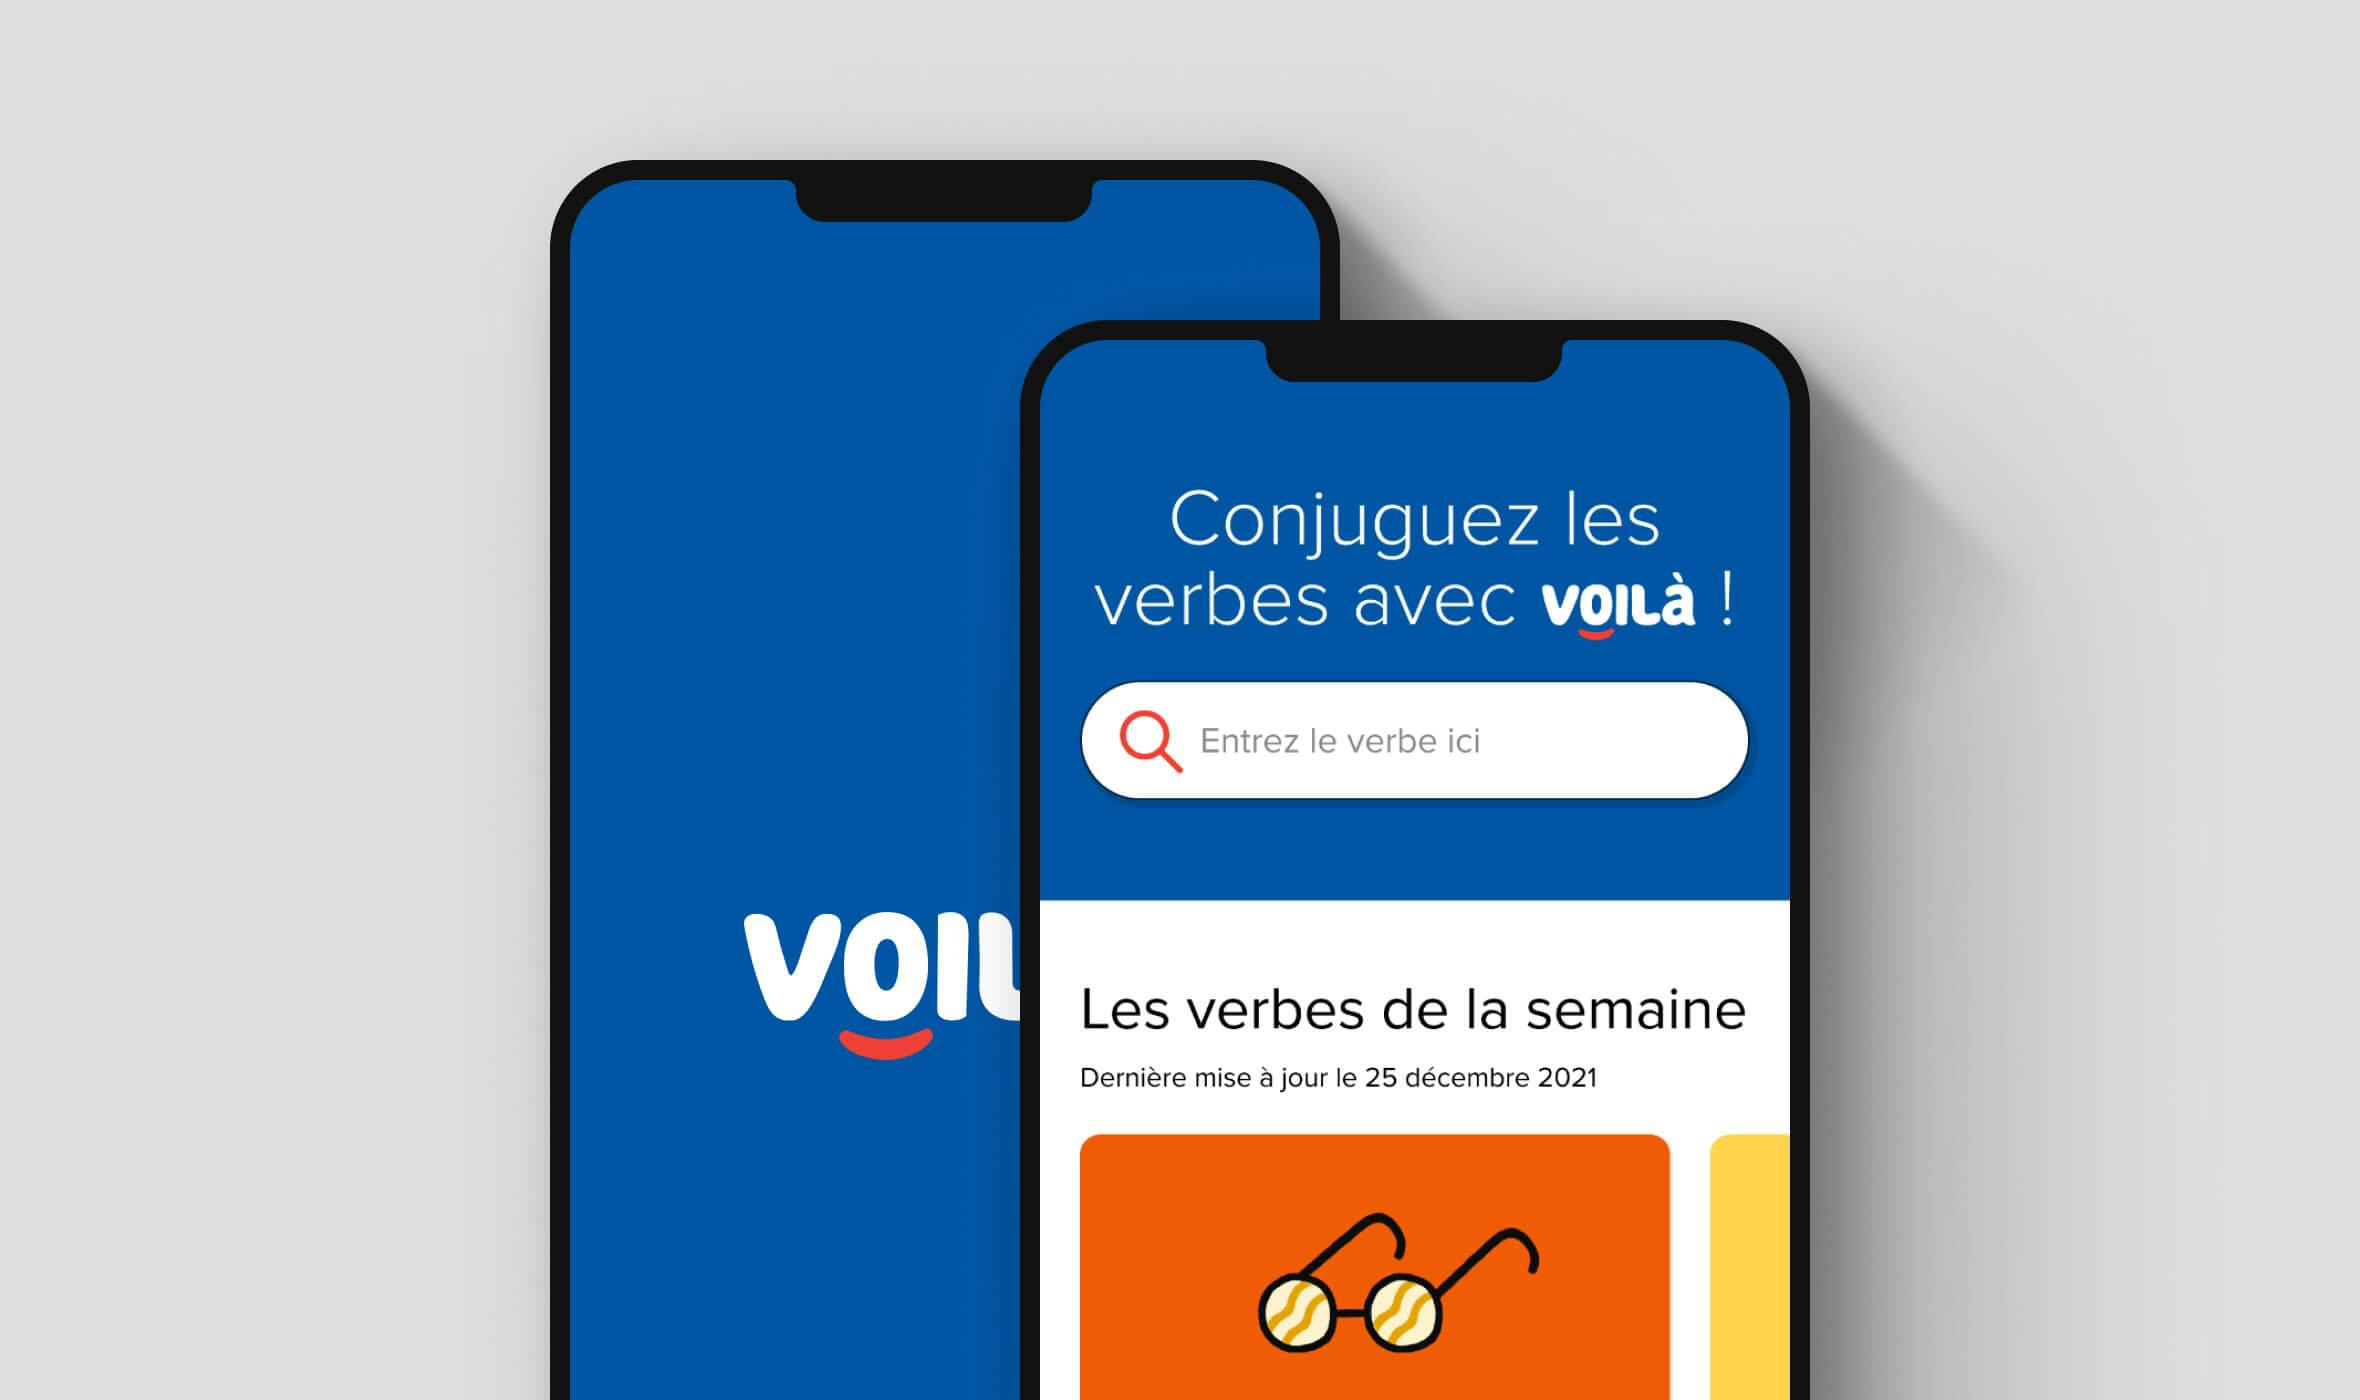 Voilà, a conceptual mobile app for students and enthusiasts of the French language. Two devices shown; one with the loading screen, the other with the main screen of the landing page.